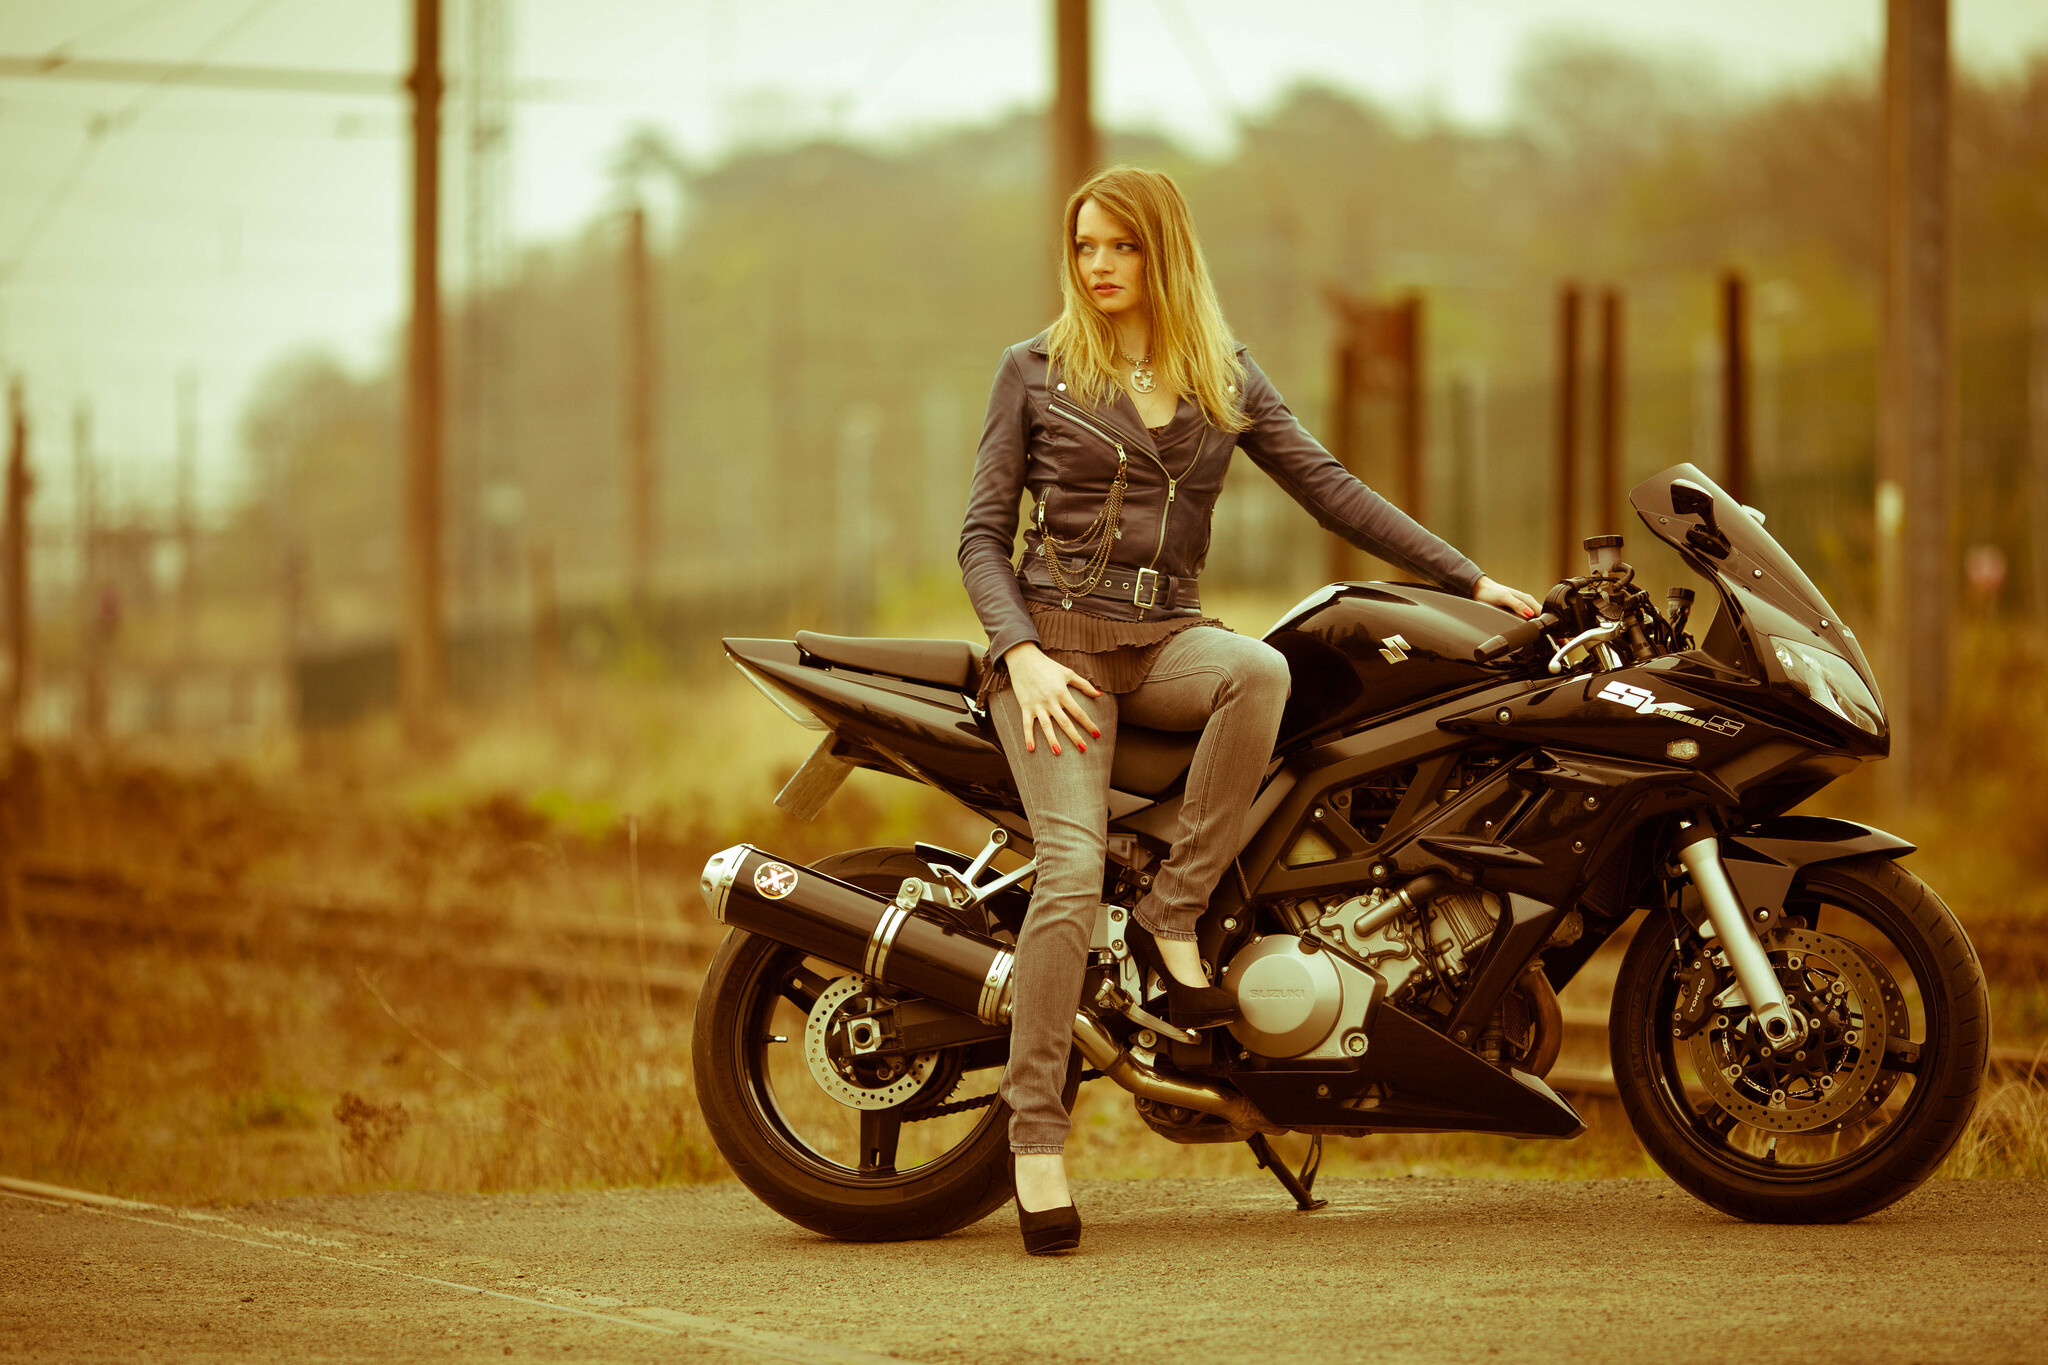 Girls and Motorcycles: Suzuki, A manufacturer of motorcycles since 1952, Street bike, Mid-sized V-twin engine. 2050x1370 HD Background.